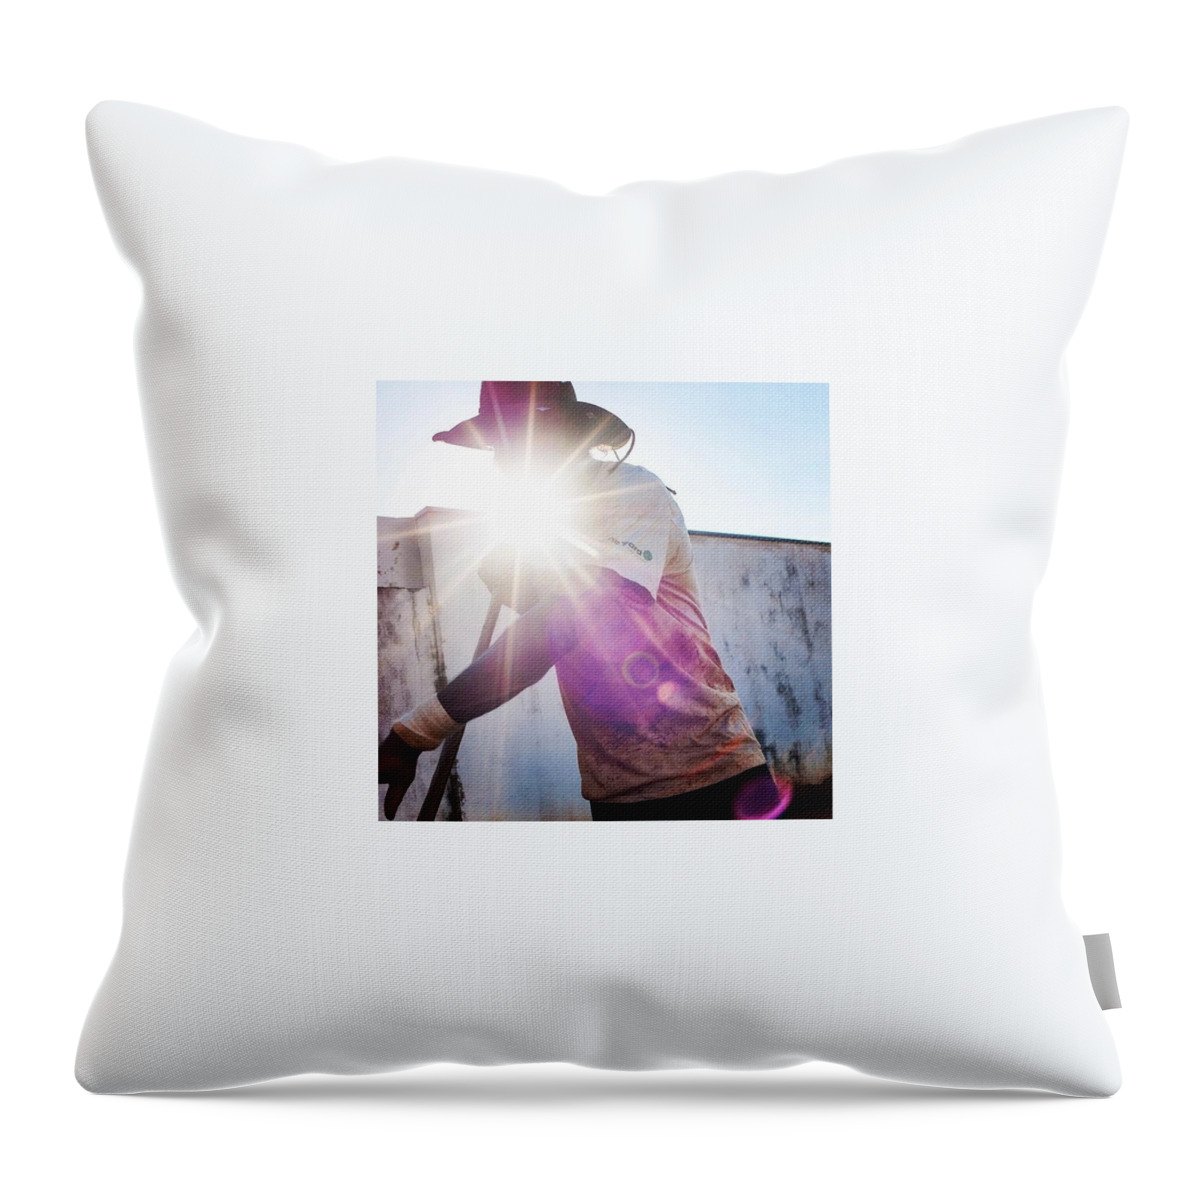 Beautiful Throw Pillow featuring the photograph In Brazil by Aleck Cartwright